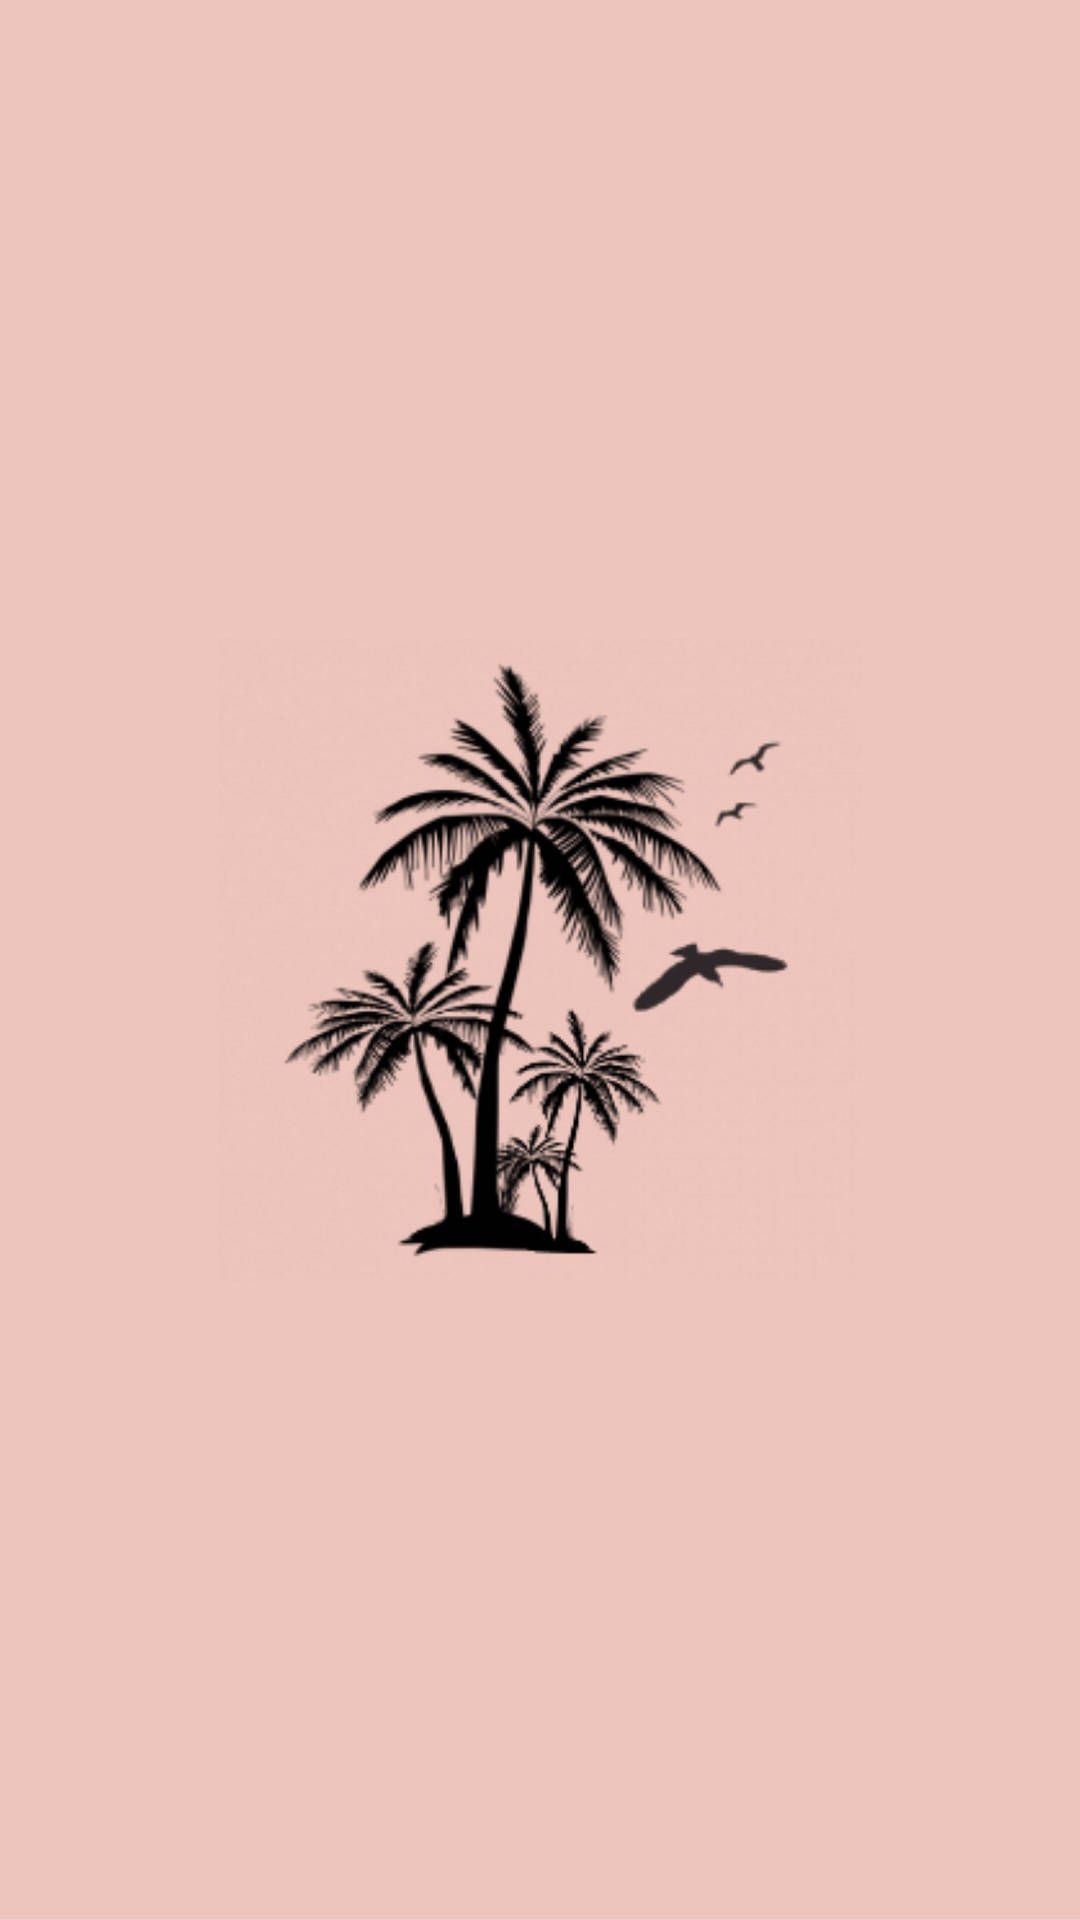 Black palm trees on a pink background - Profile picture